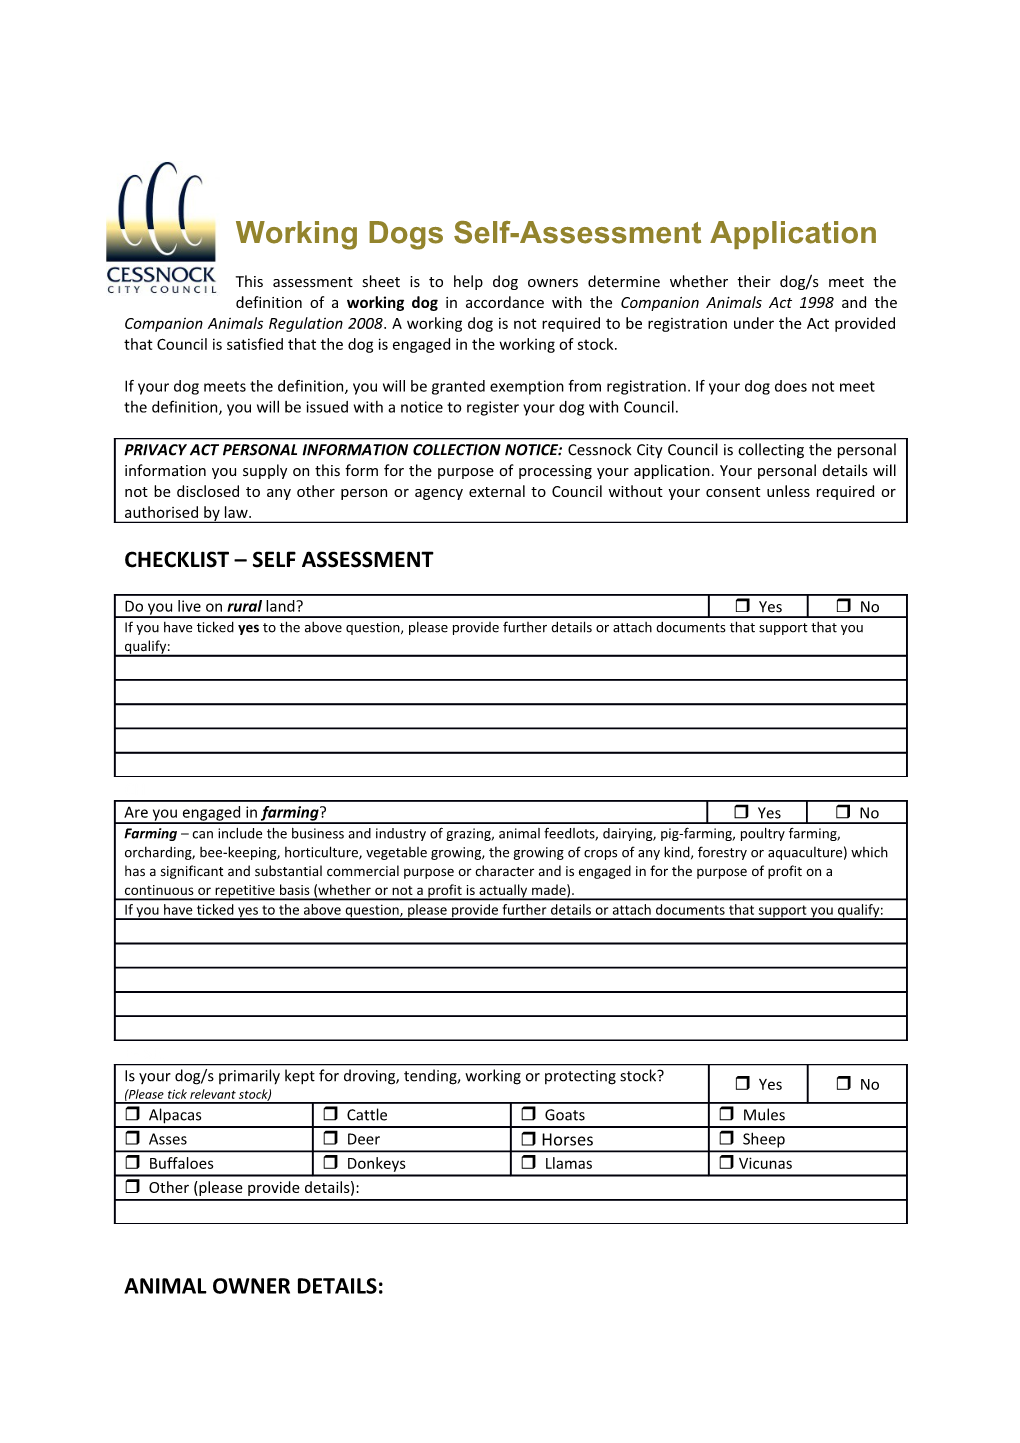 Working Dogs Self-Assessment Application